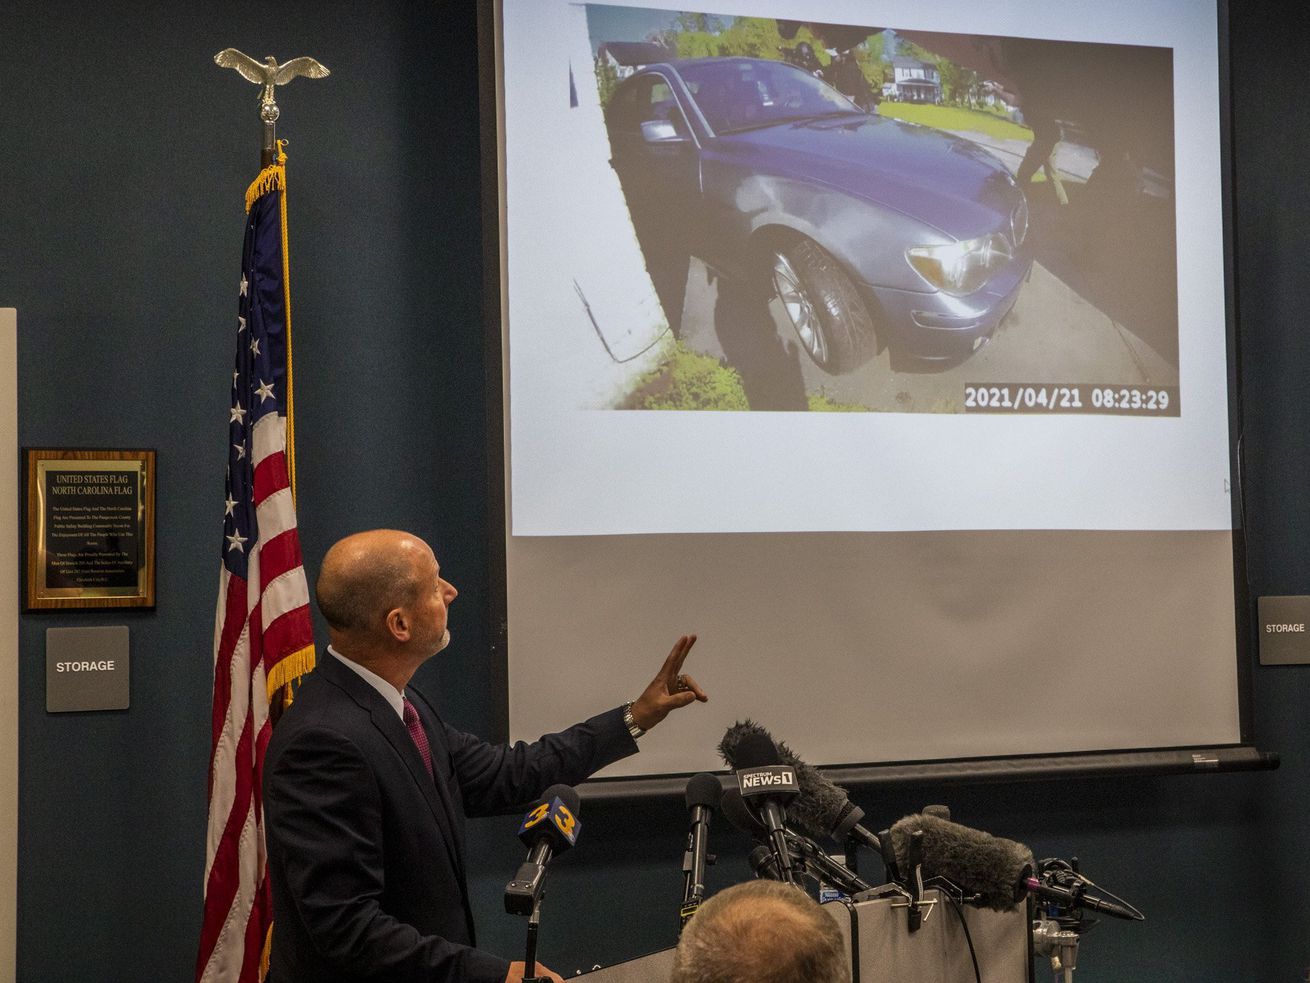 Pasquotank County District Attorney Andrew Womble shows still images from police body camera footage after announcing he will not charge deputies in the April 21 fatal shooting of Andrew Brown Jr. during a news conference Tuesday, May 18, 2021 at the Pasquotank County Public Safety building in Elizabeth City, N.C. 